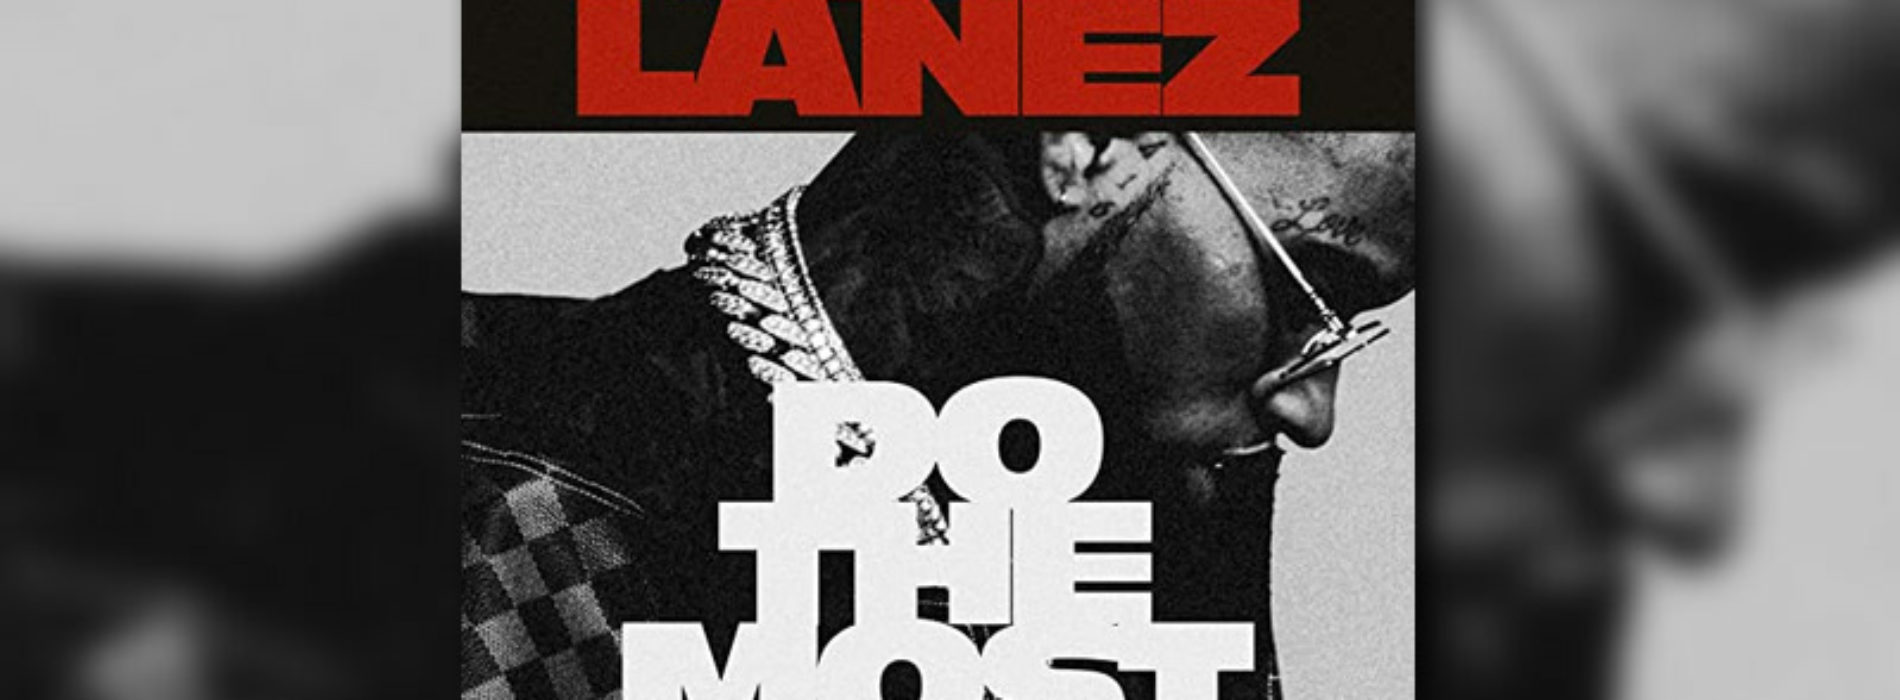 Tory Lanez – Do The Most (Official Music Video) – Avril 2020